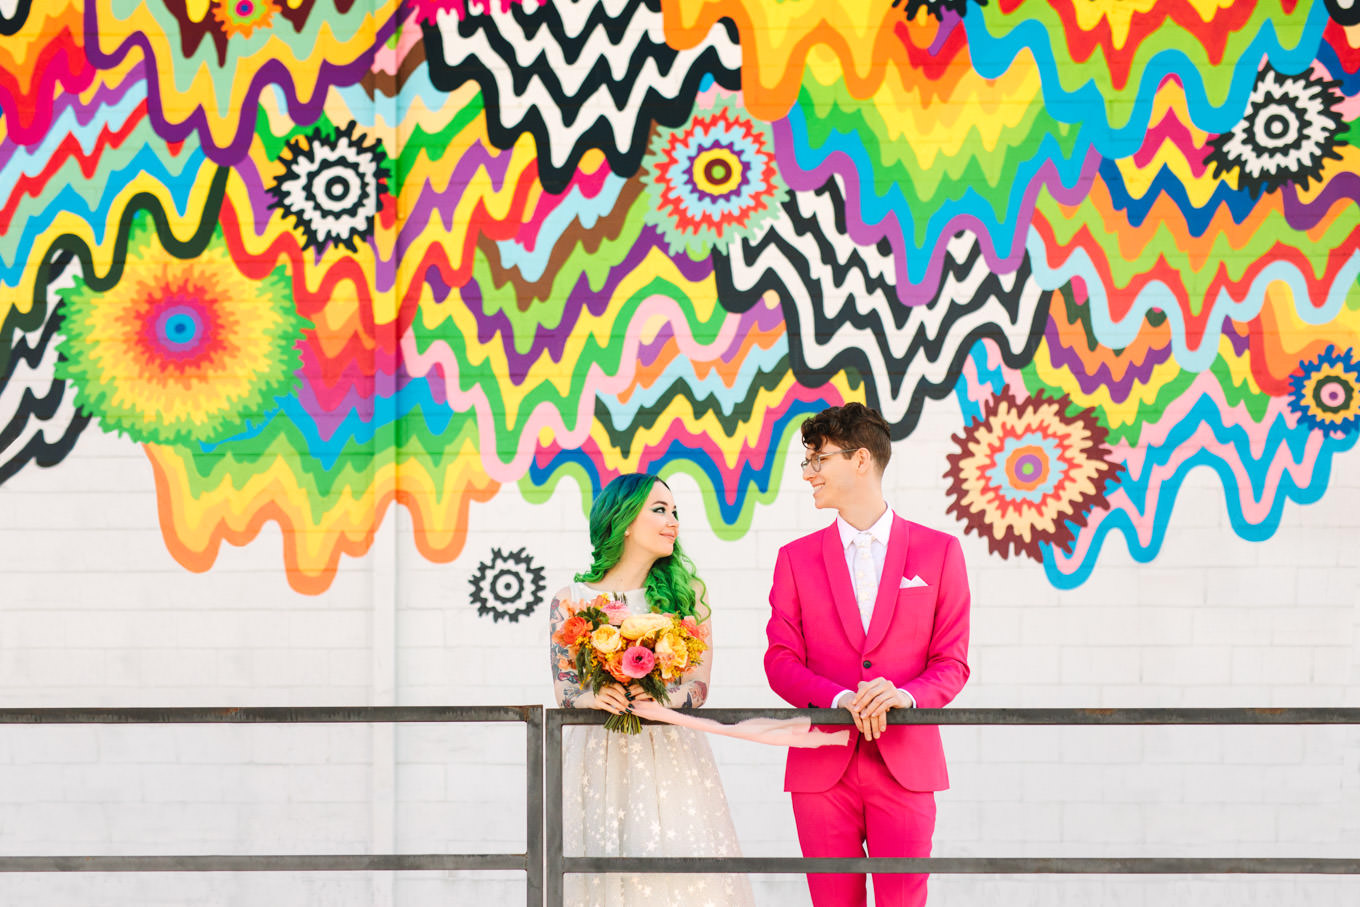 Rainbow mural with groom in hot pink suit and bride with green hair | Engagement, elopement, and wedding photography roundup of Mary Costa’s favorite images from 2020 | Colorful and elevated photography for fun-loving couples in Southern California | #2020wedding #elopement #weddingphoto #weddingphotography   Source: Mary Costa Photography | Los Angeles